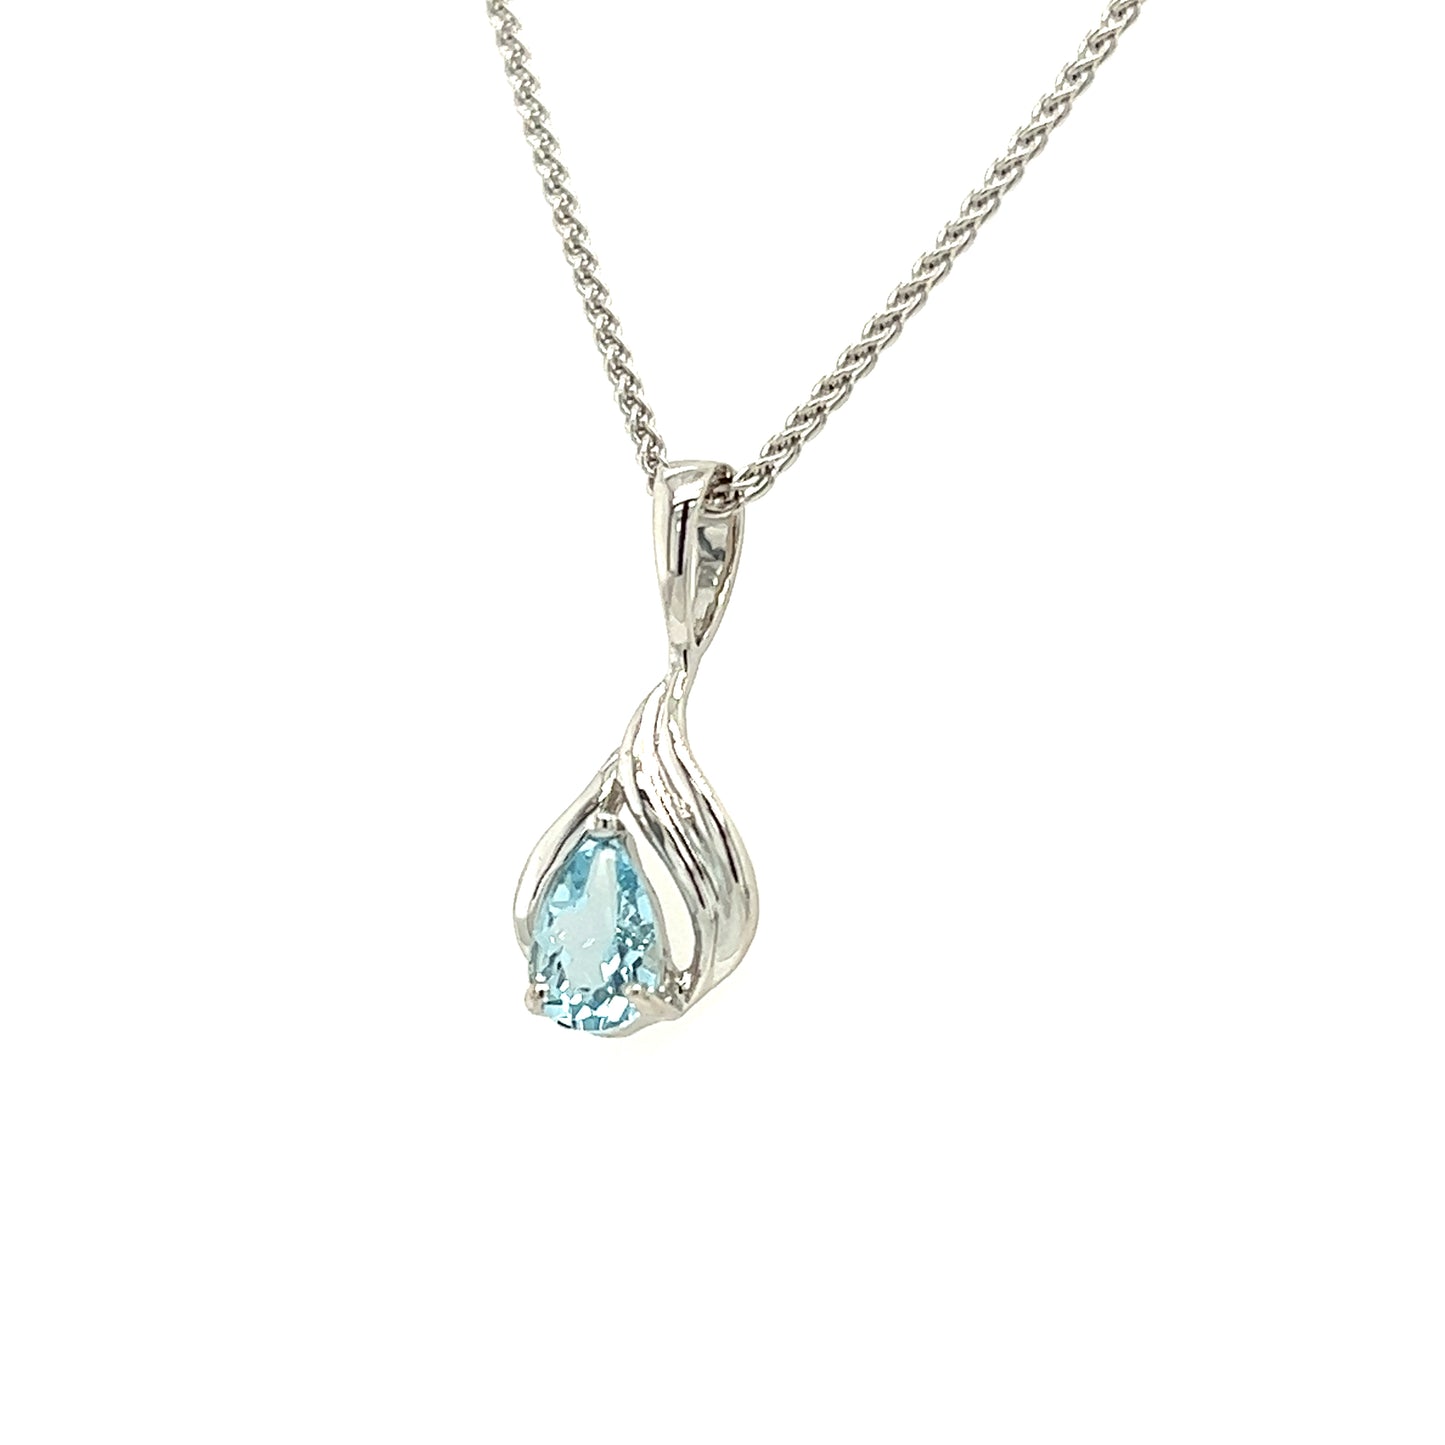 Pear Aquamarine Pendant with Flame Motif in 14K White Gold Pendant and Chain Right Side View